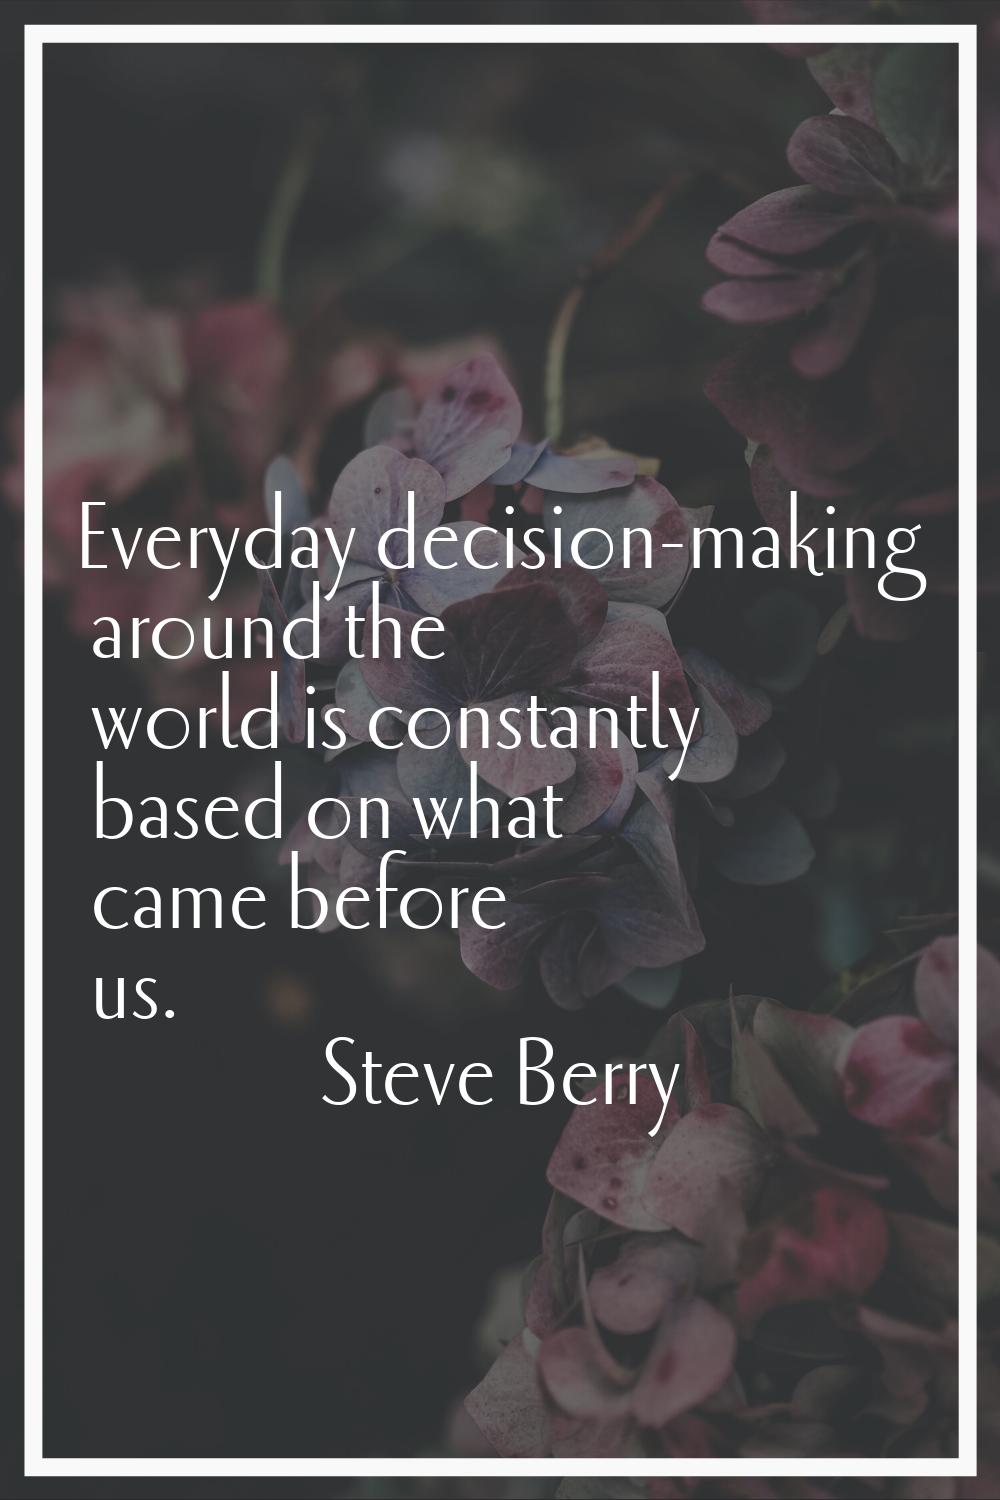 Everyday decision-making around the world is constantly based on what came before us.